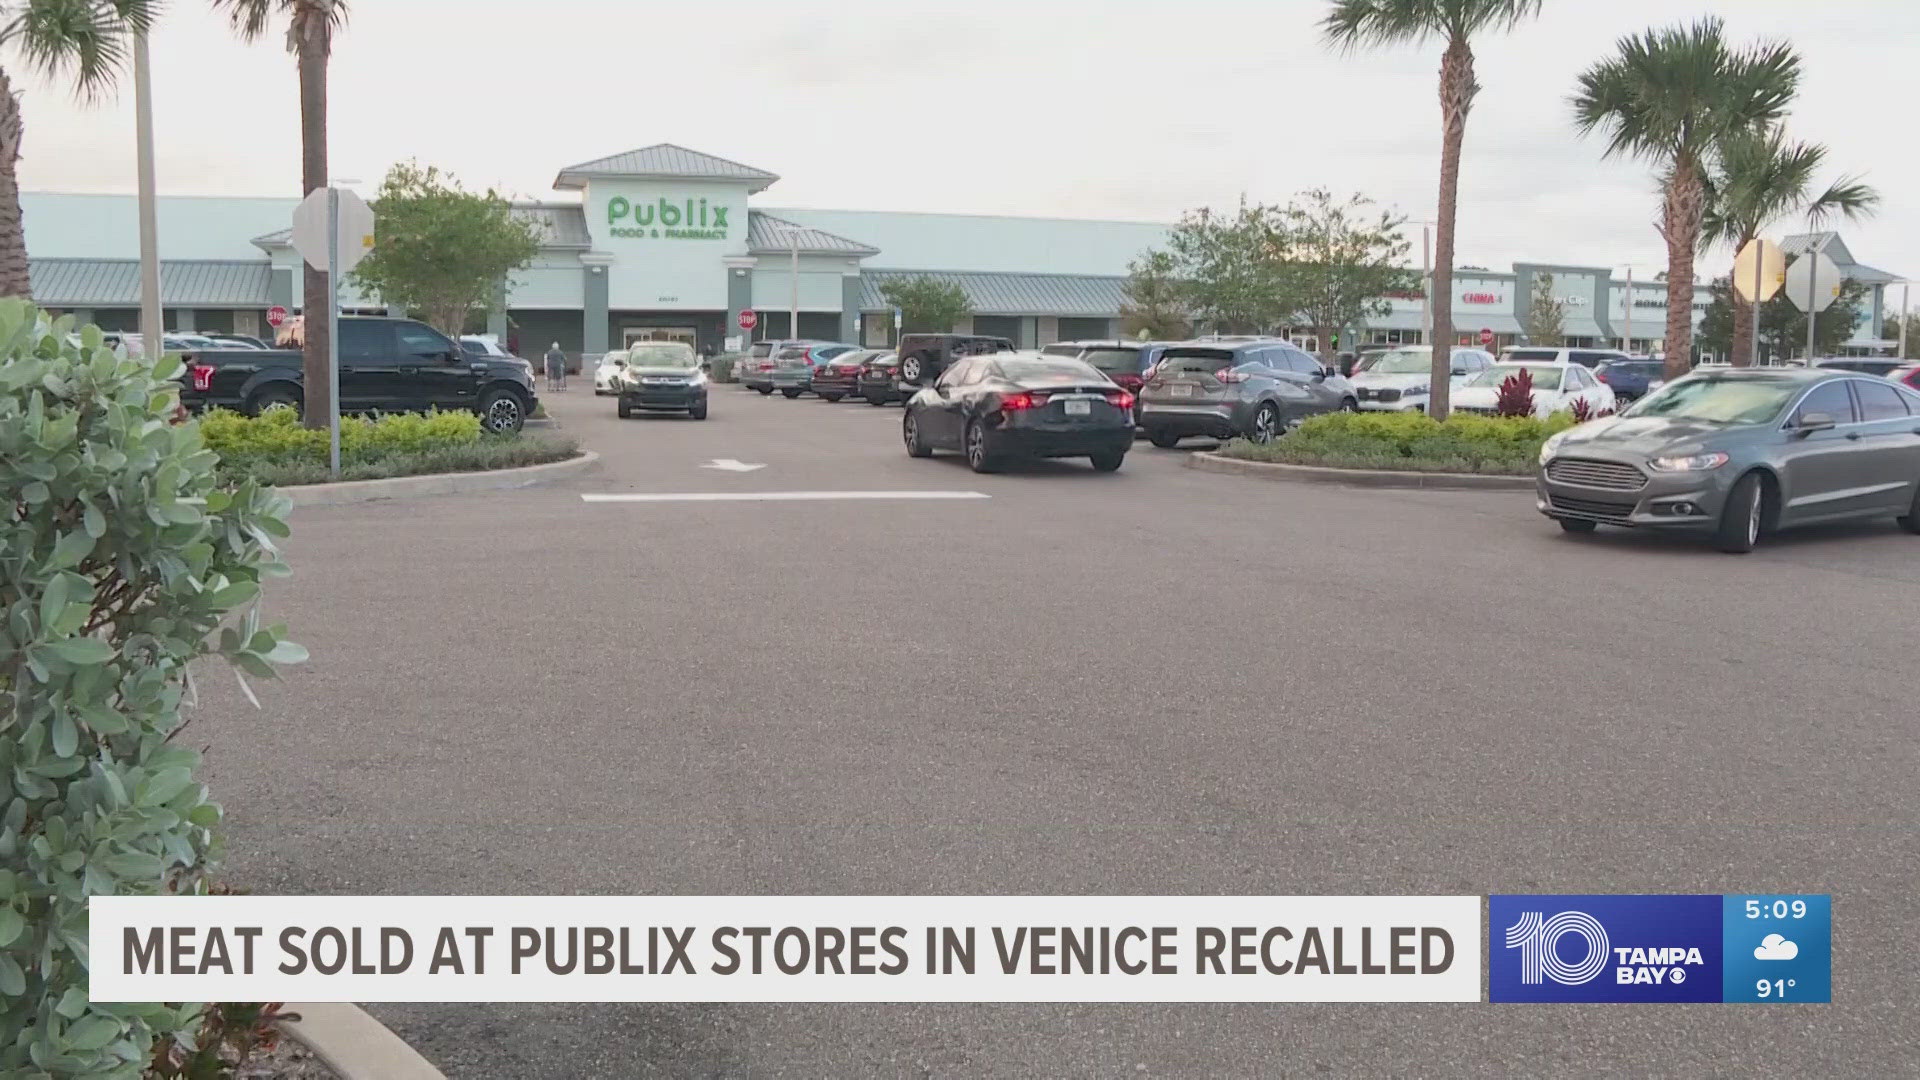 The recall results from "the potential of a foreign material in the product," Publix officials said in an online release.